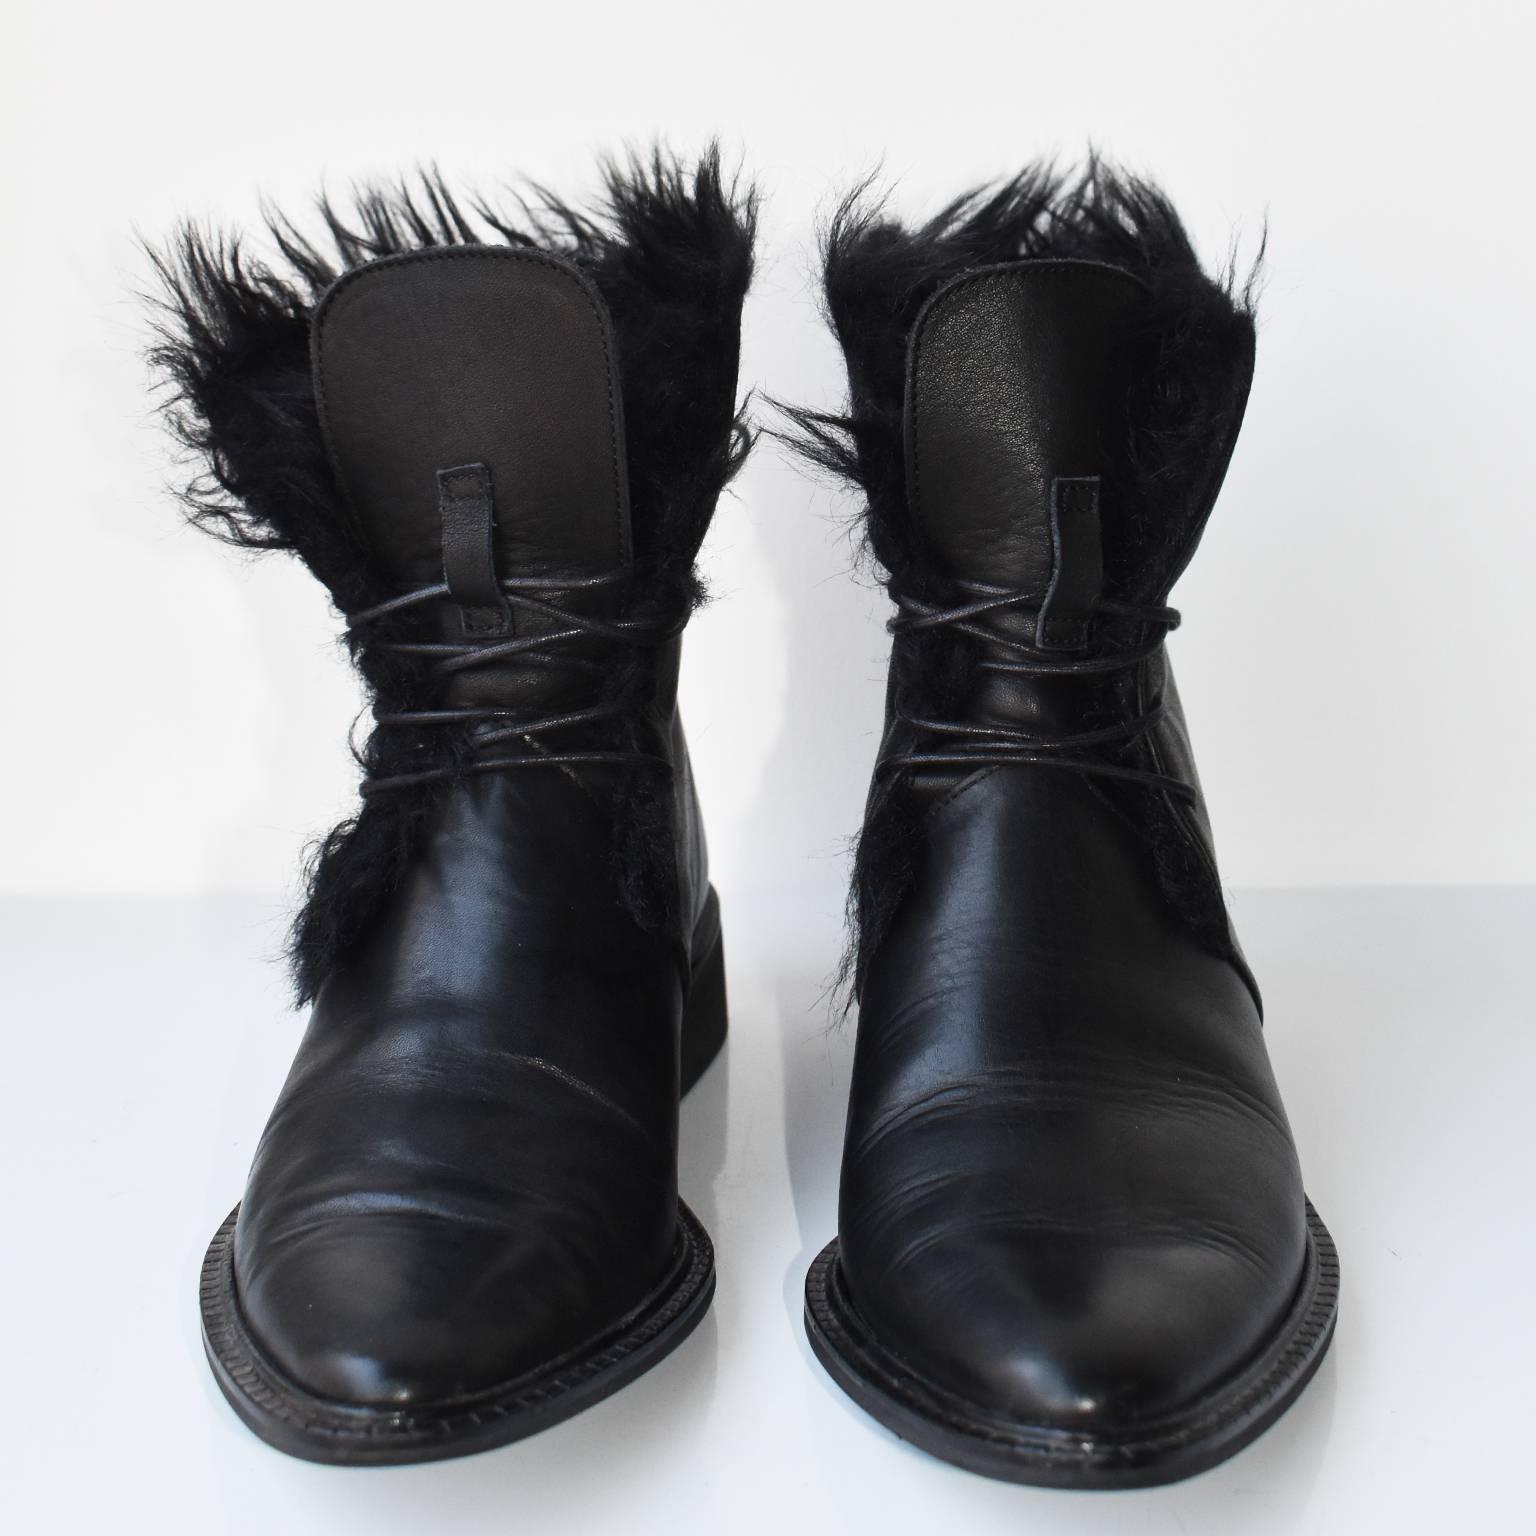 Fur lined leather lace-ups by Y's Yohji Yamamoto. The shoe features a pointed toe and long laces which can be tied around the ankle. They are in excellent condition. A Japanese size 1.